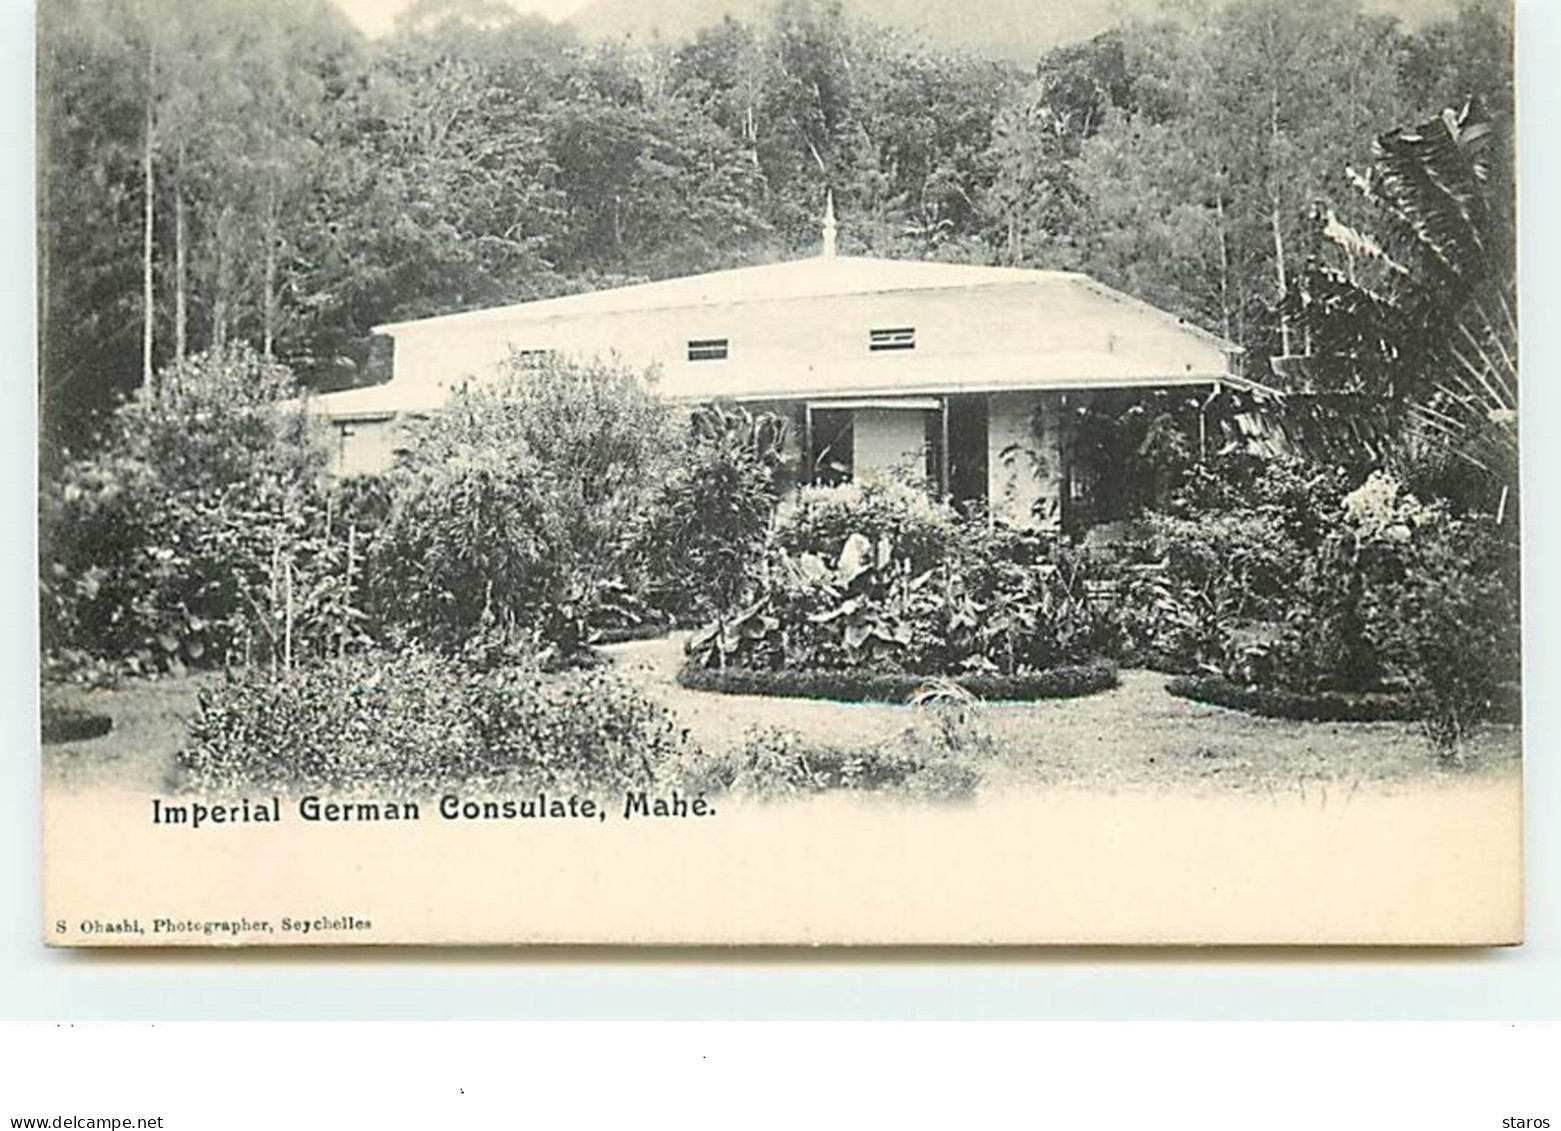 SEYCHELLES - Imperial German Consulate - MAHE - Seychelles